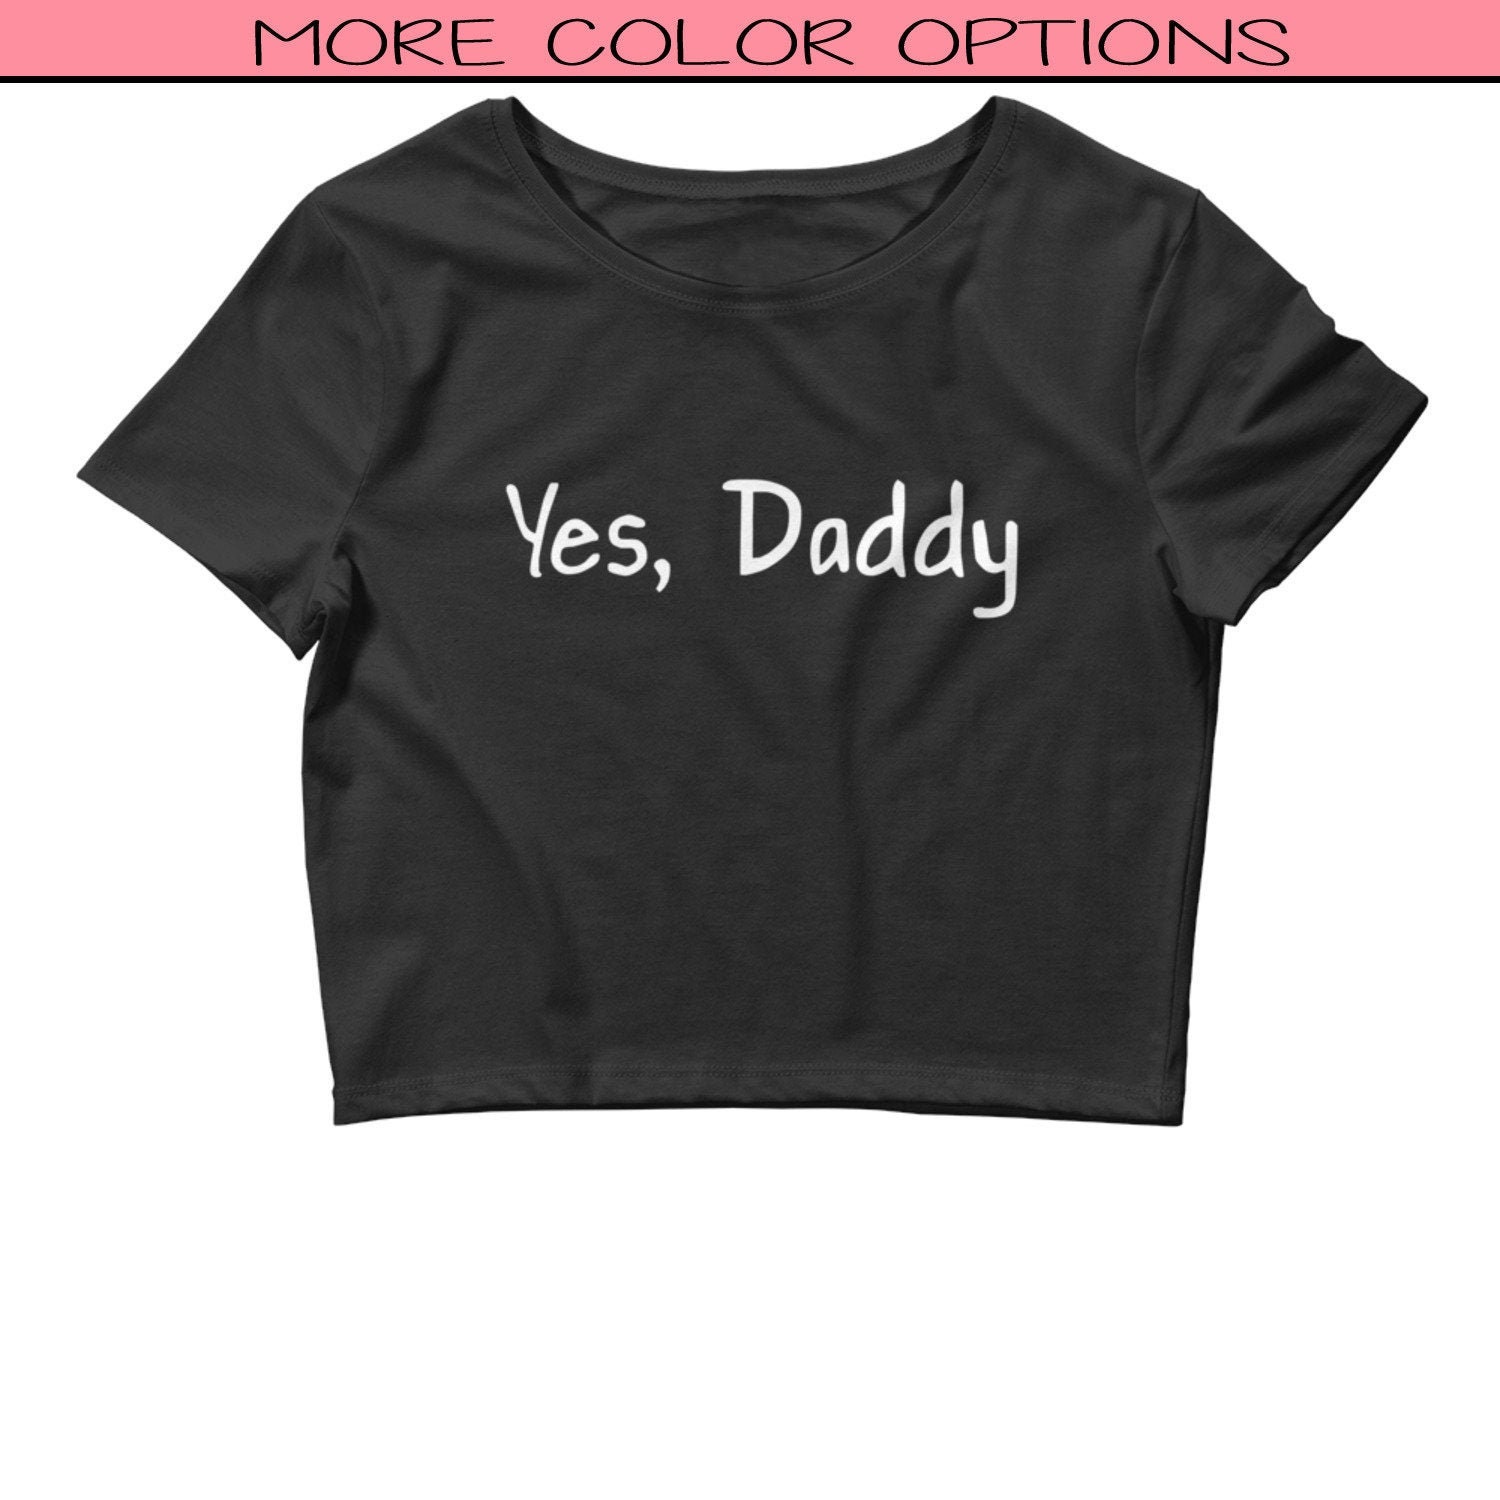 Yes Daddy Crop Top Yes Daddy Shirt Funny Sex Shirt Etsy Uk